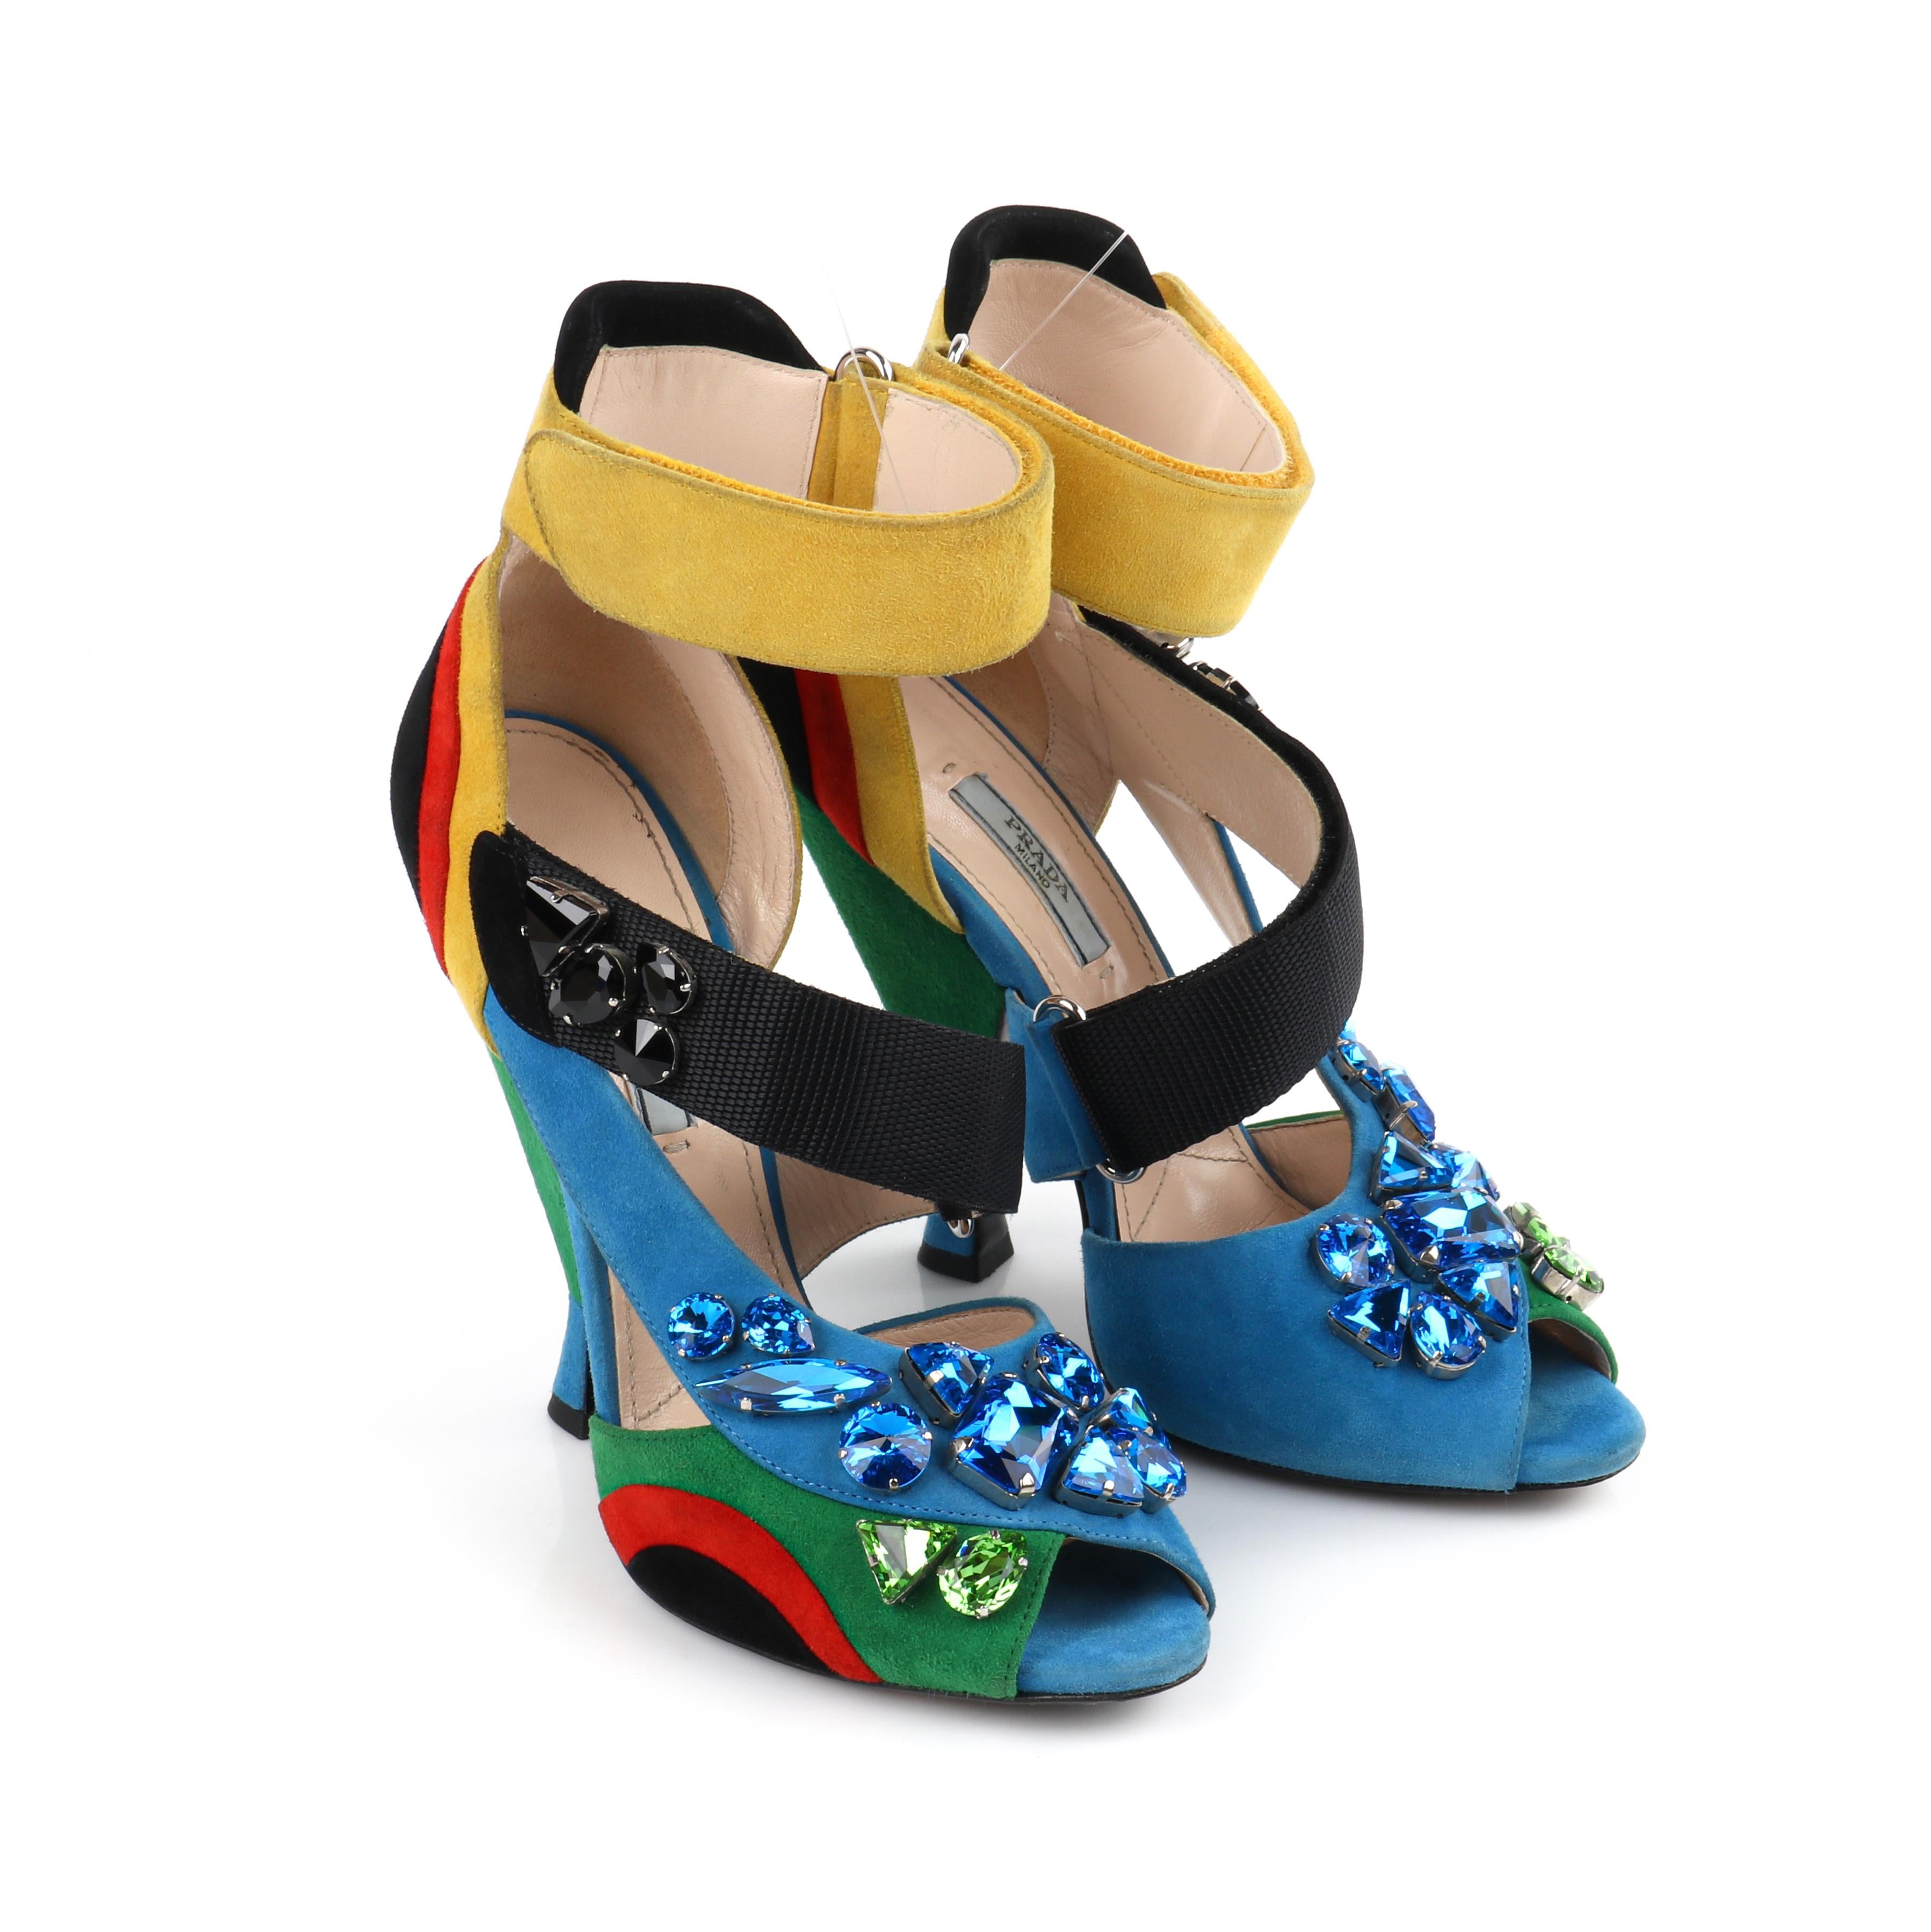 Blue PRADA Color Block Suede Modern Abstract Jeweled Strappy Peep Toe Sandal Pumps